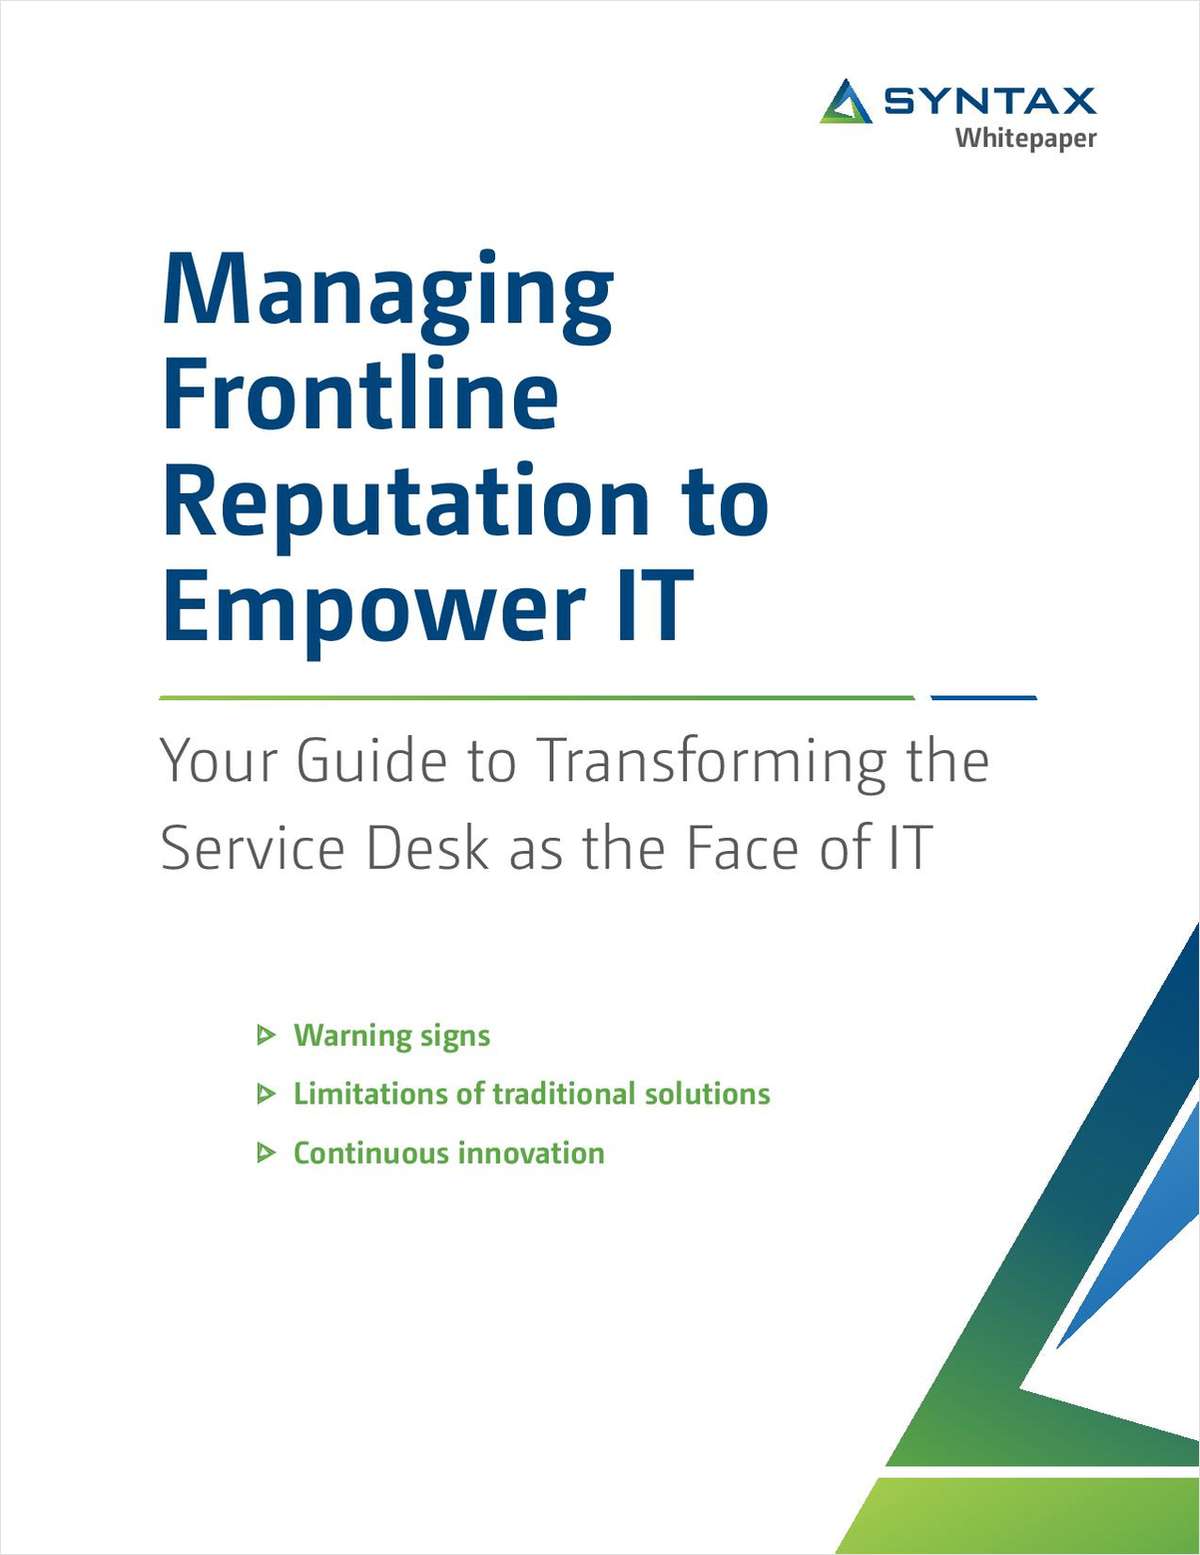 Managing Frontline Reputation to Empower IT: Your Guide to Transforming the Service Desk as the Face of IT